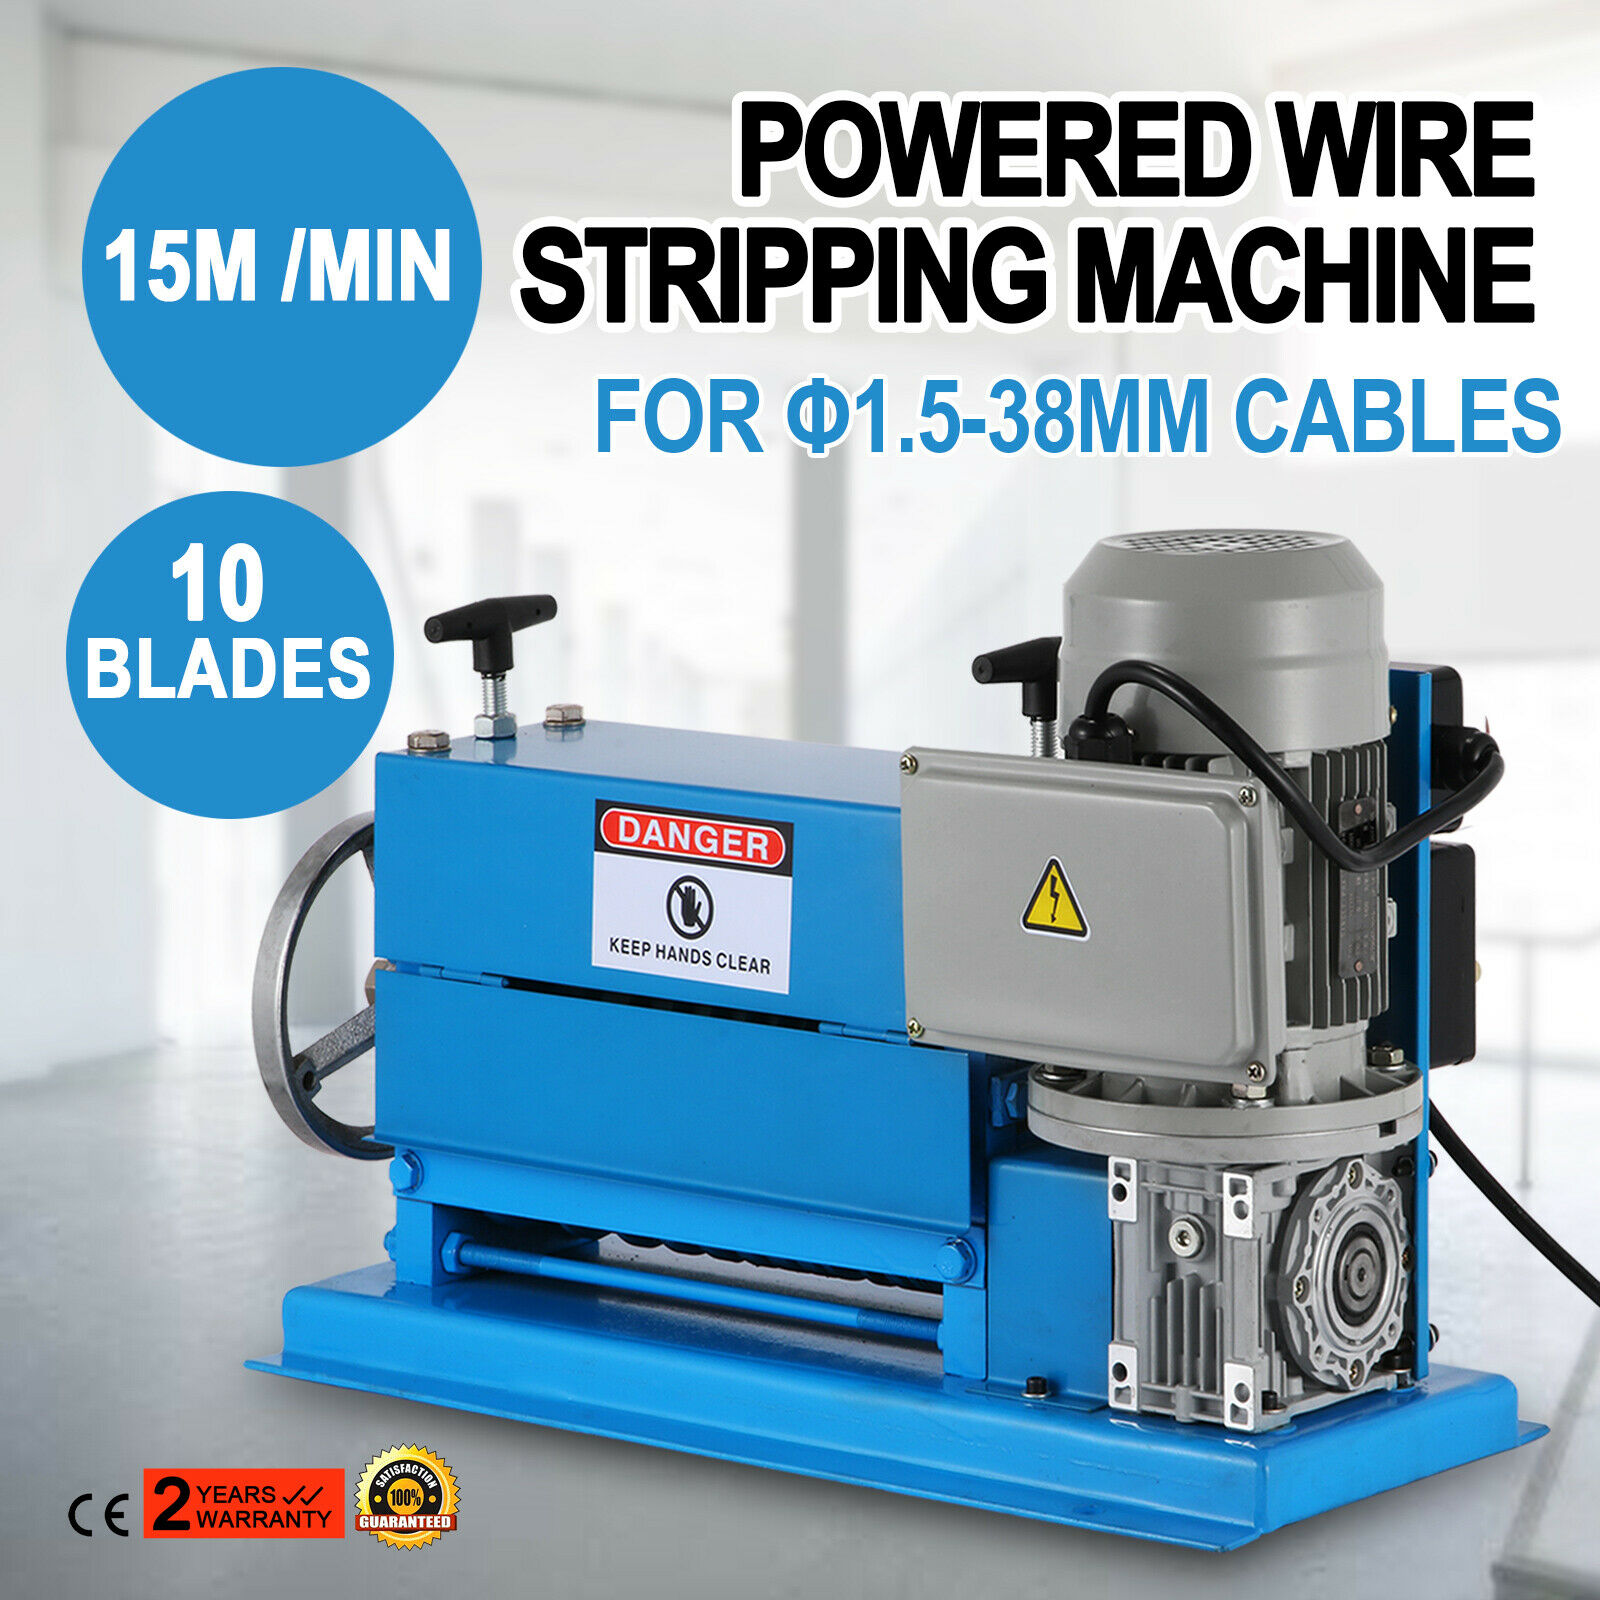 VEVOR new style 220V Portable Powered Electric Wire Stripping Machine Scrap Cable Stripper